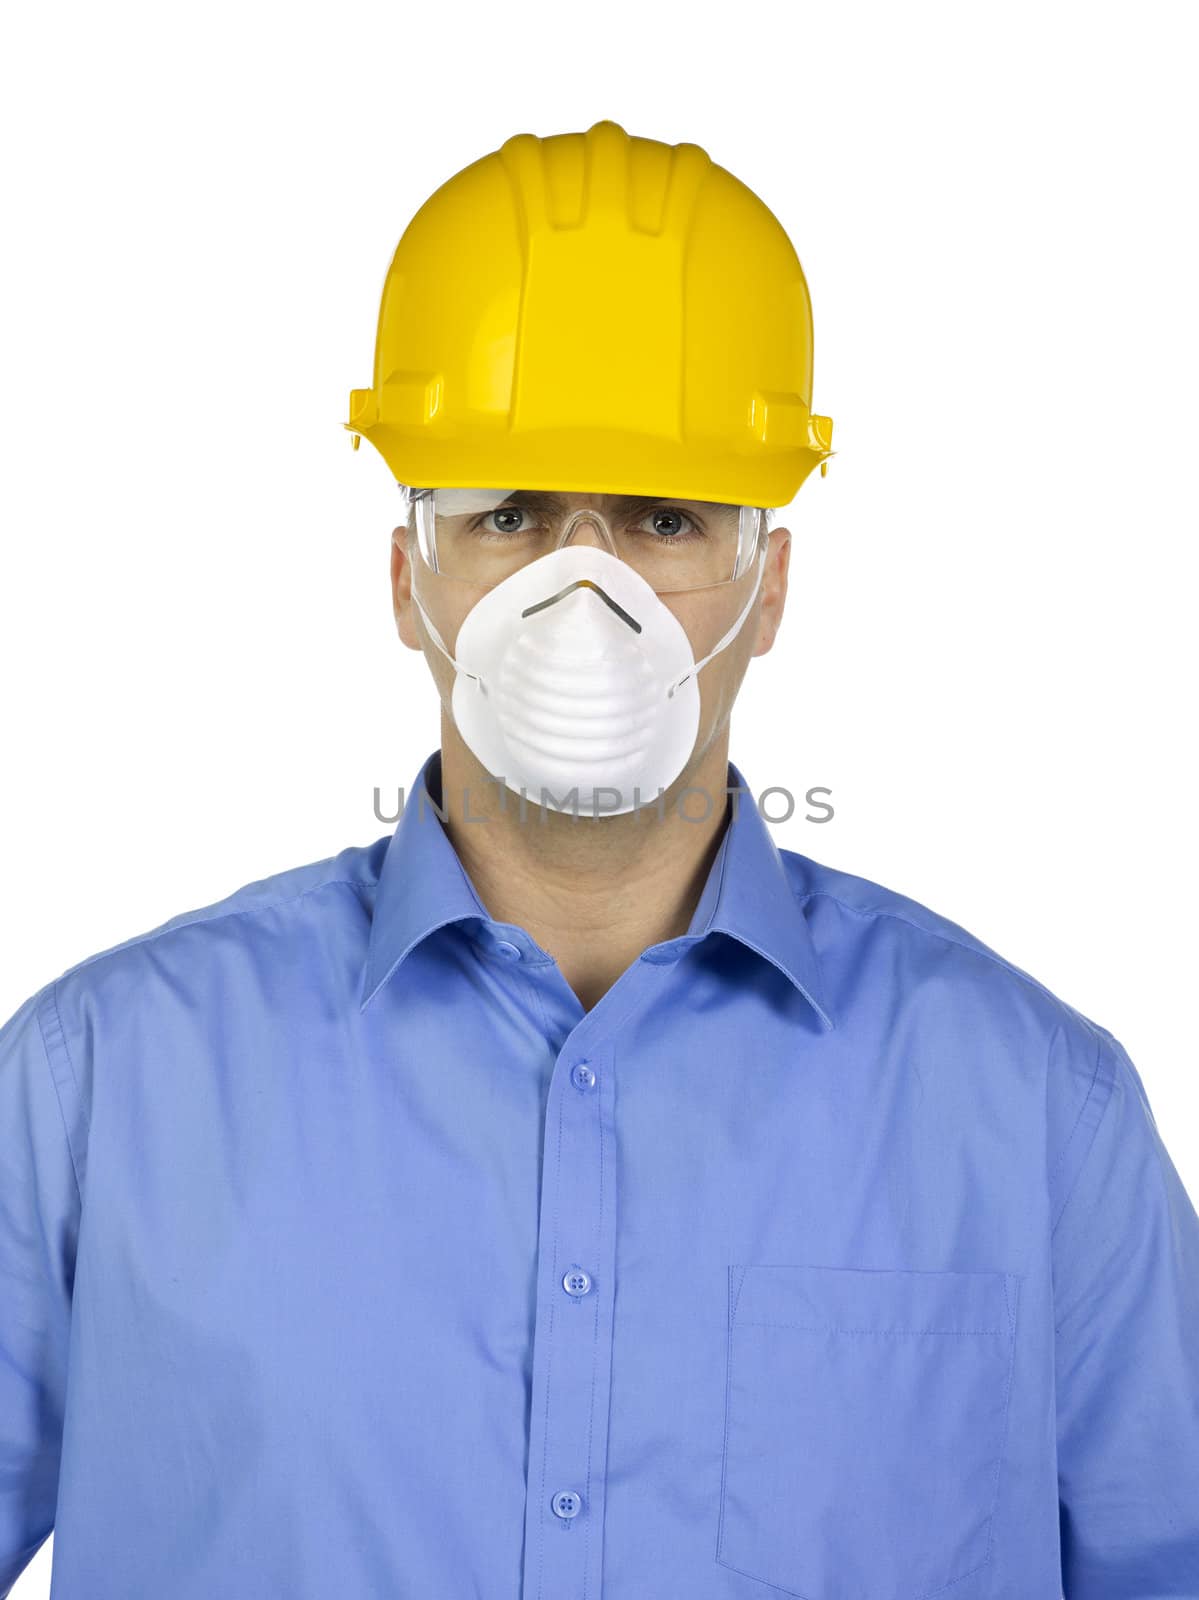 A young male construction worker wearing a protective gear on his face